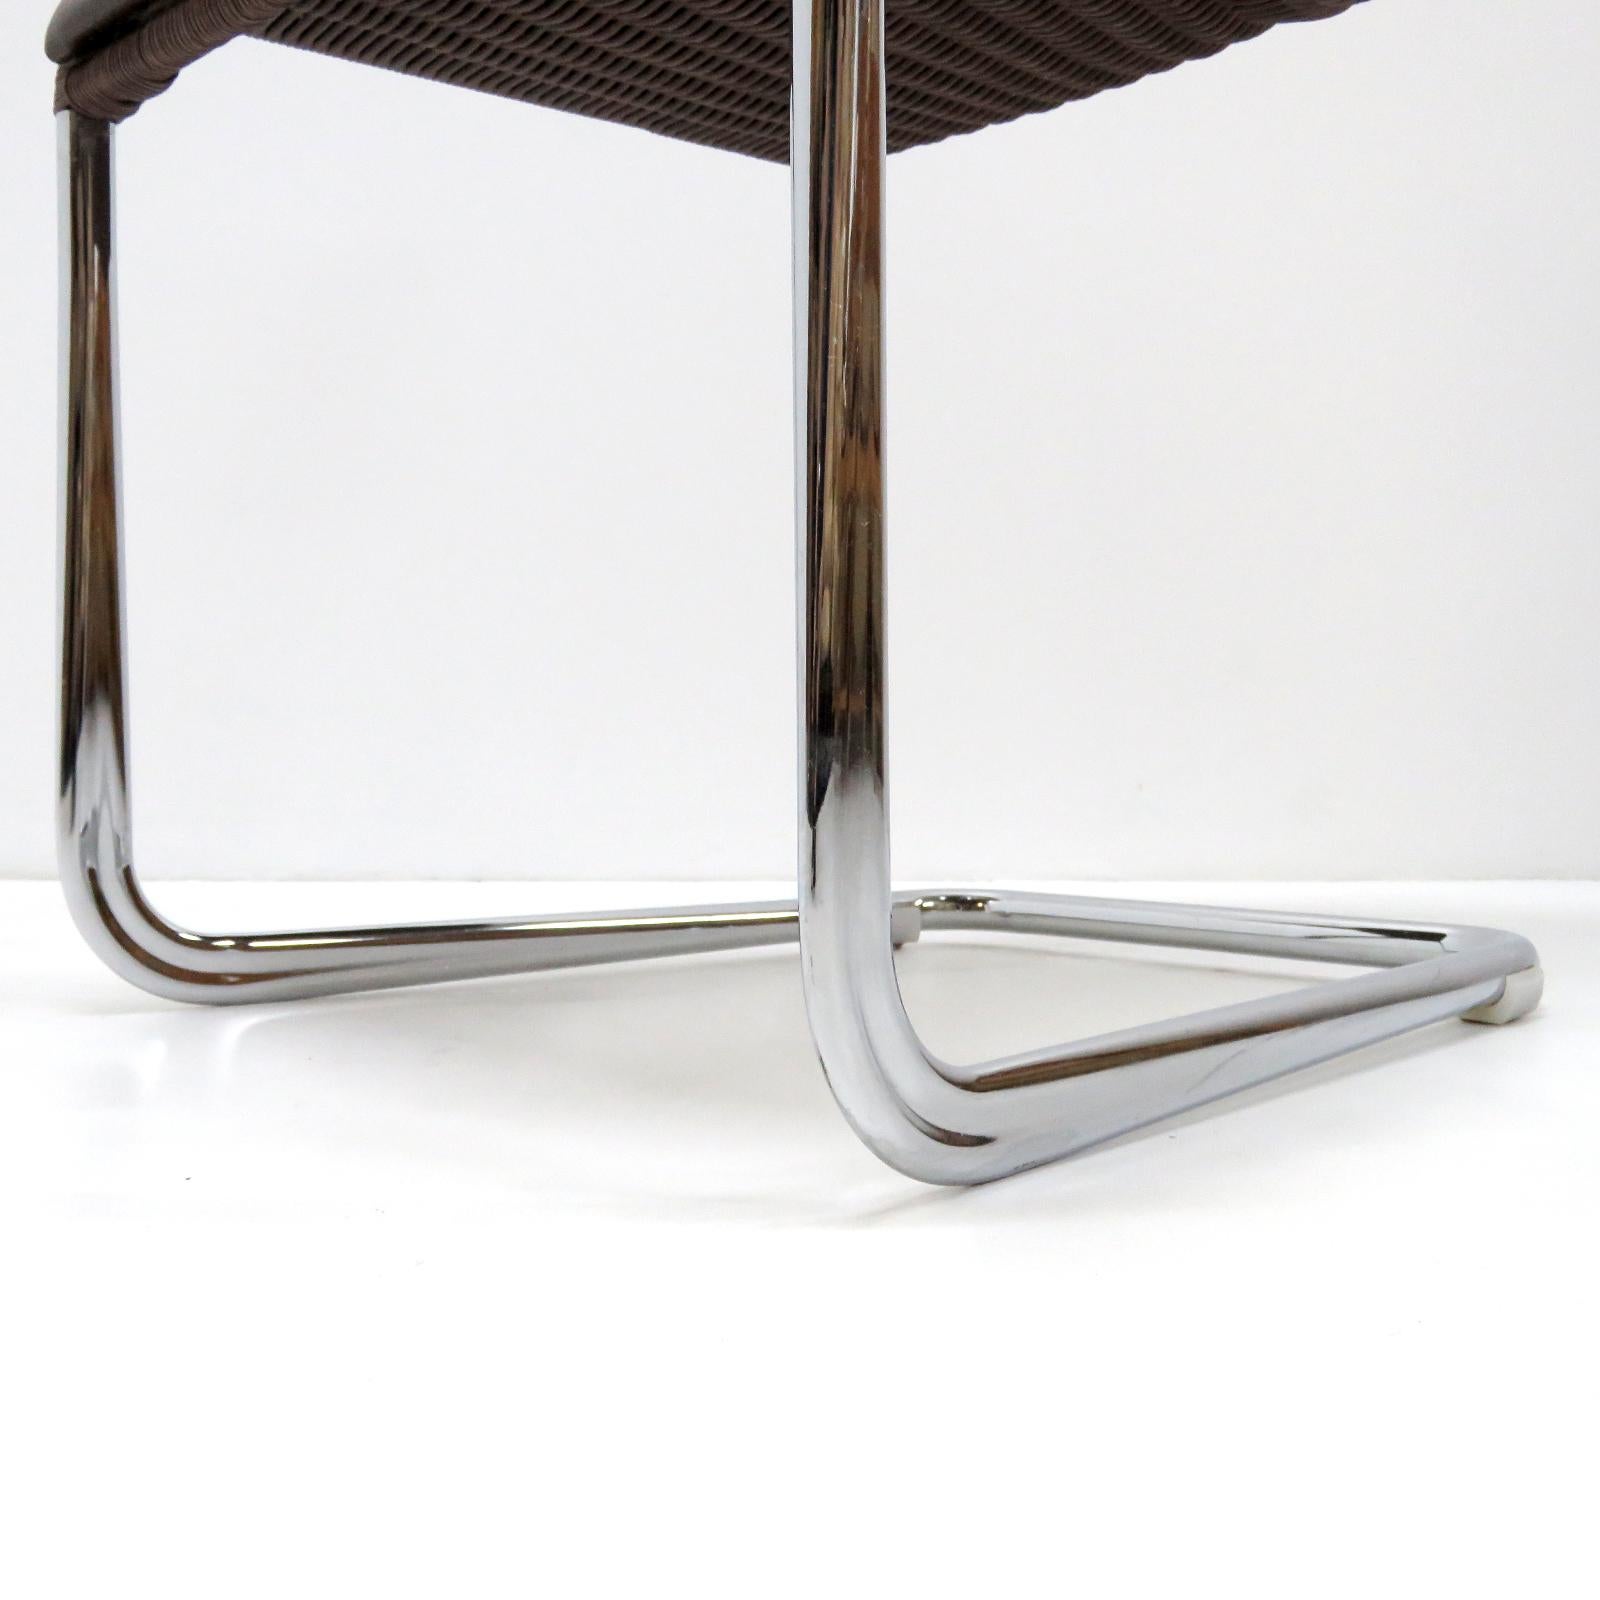 Axel Brüchhauser for Tecta B45 High Back Chairs, 1981 For Sale 3